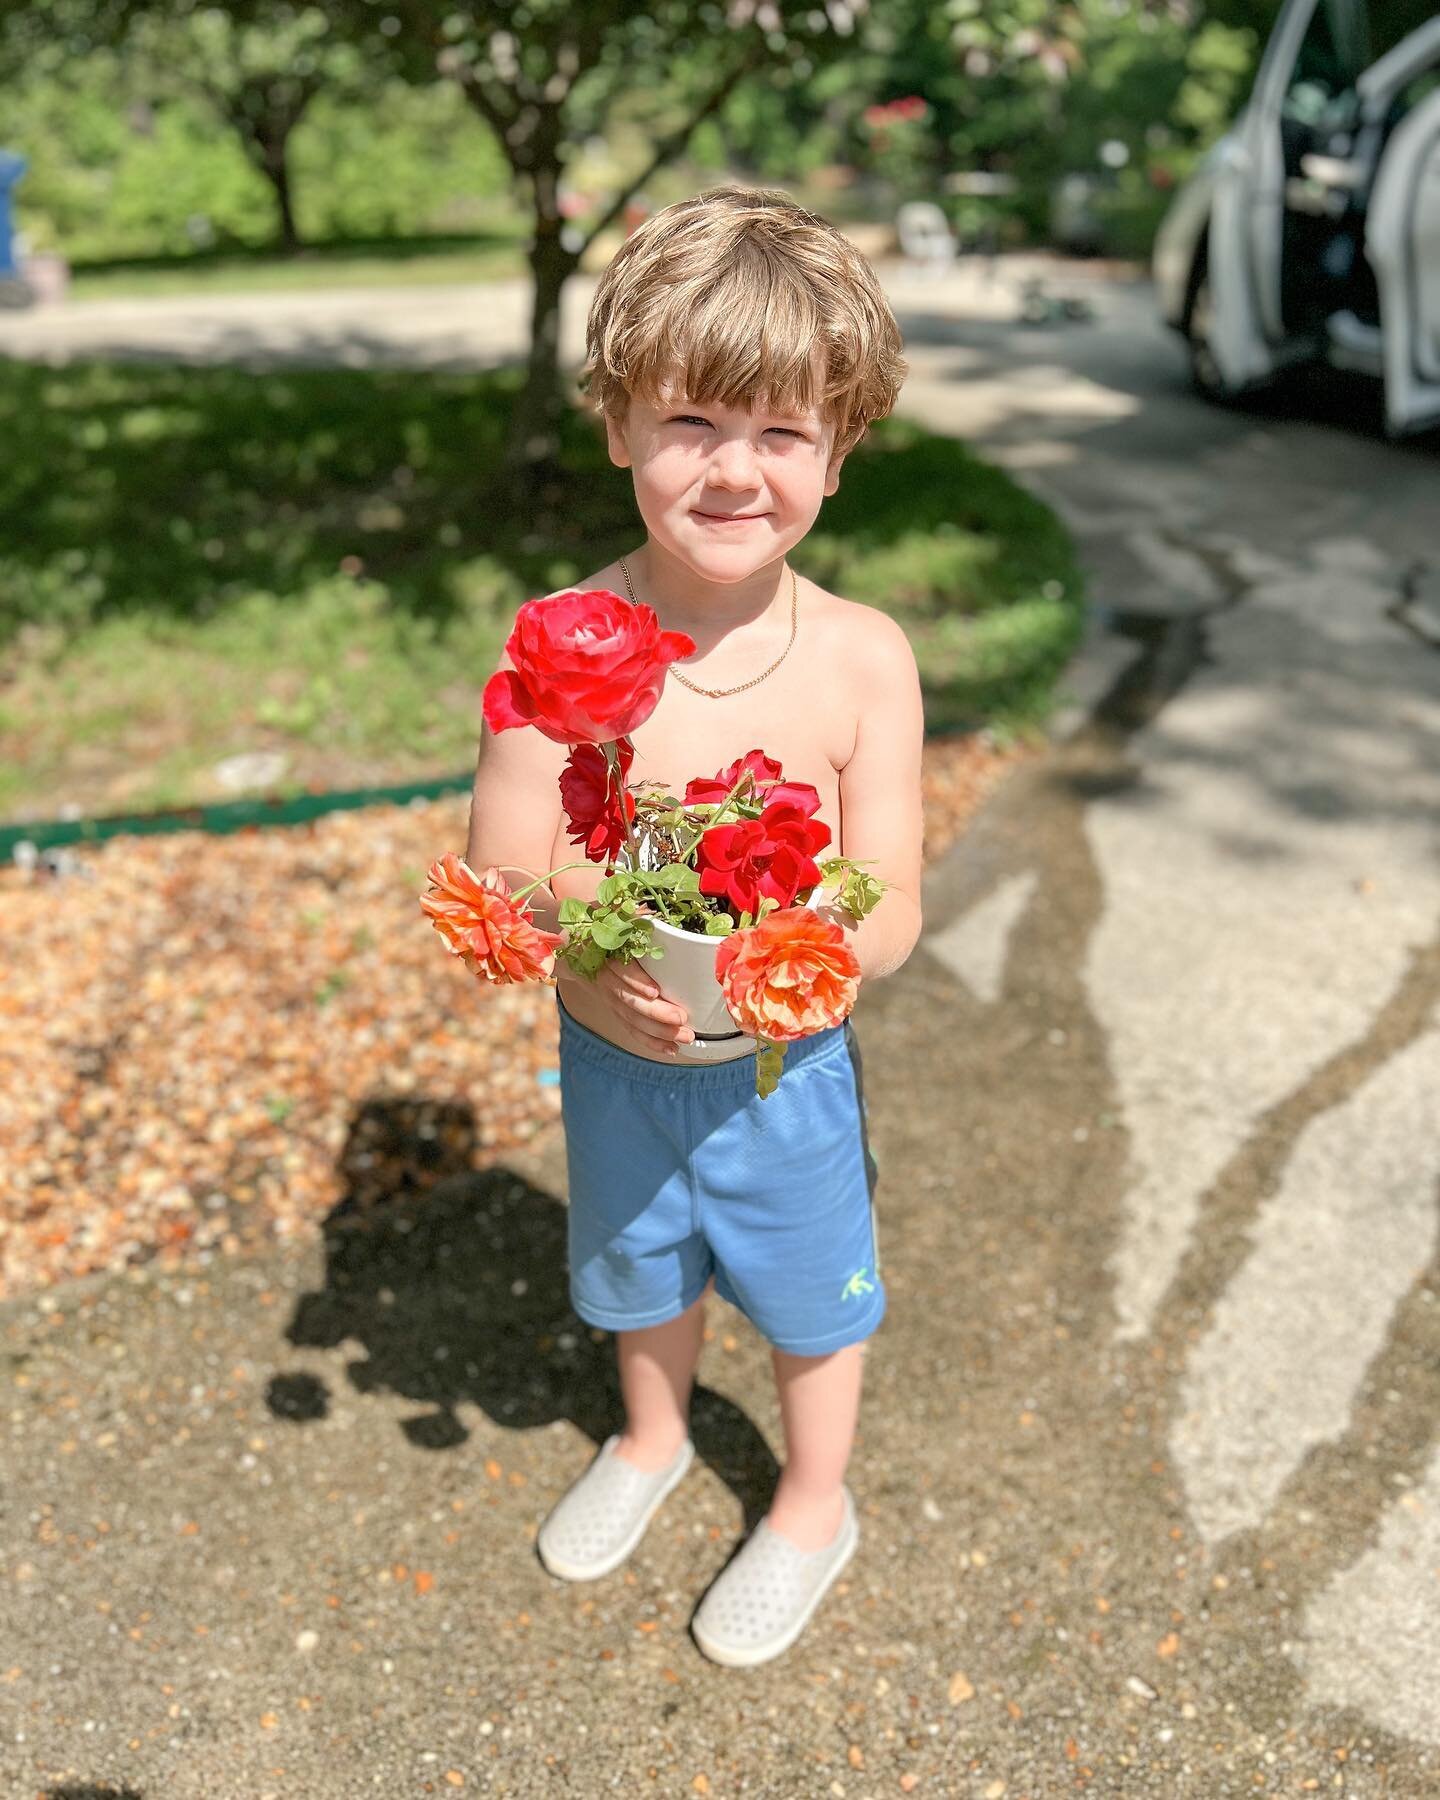 The best things in life are free 🌹

It&rsquo;s not about the material things, it&rsquo;s the thought and love behind these 6 flowers. 
This boy has the sweetest soul and is so caring. He came up to me and said &ldquo;happy Mother&rsquo;s Day, I made